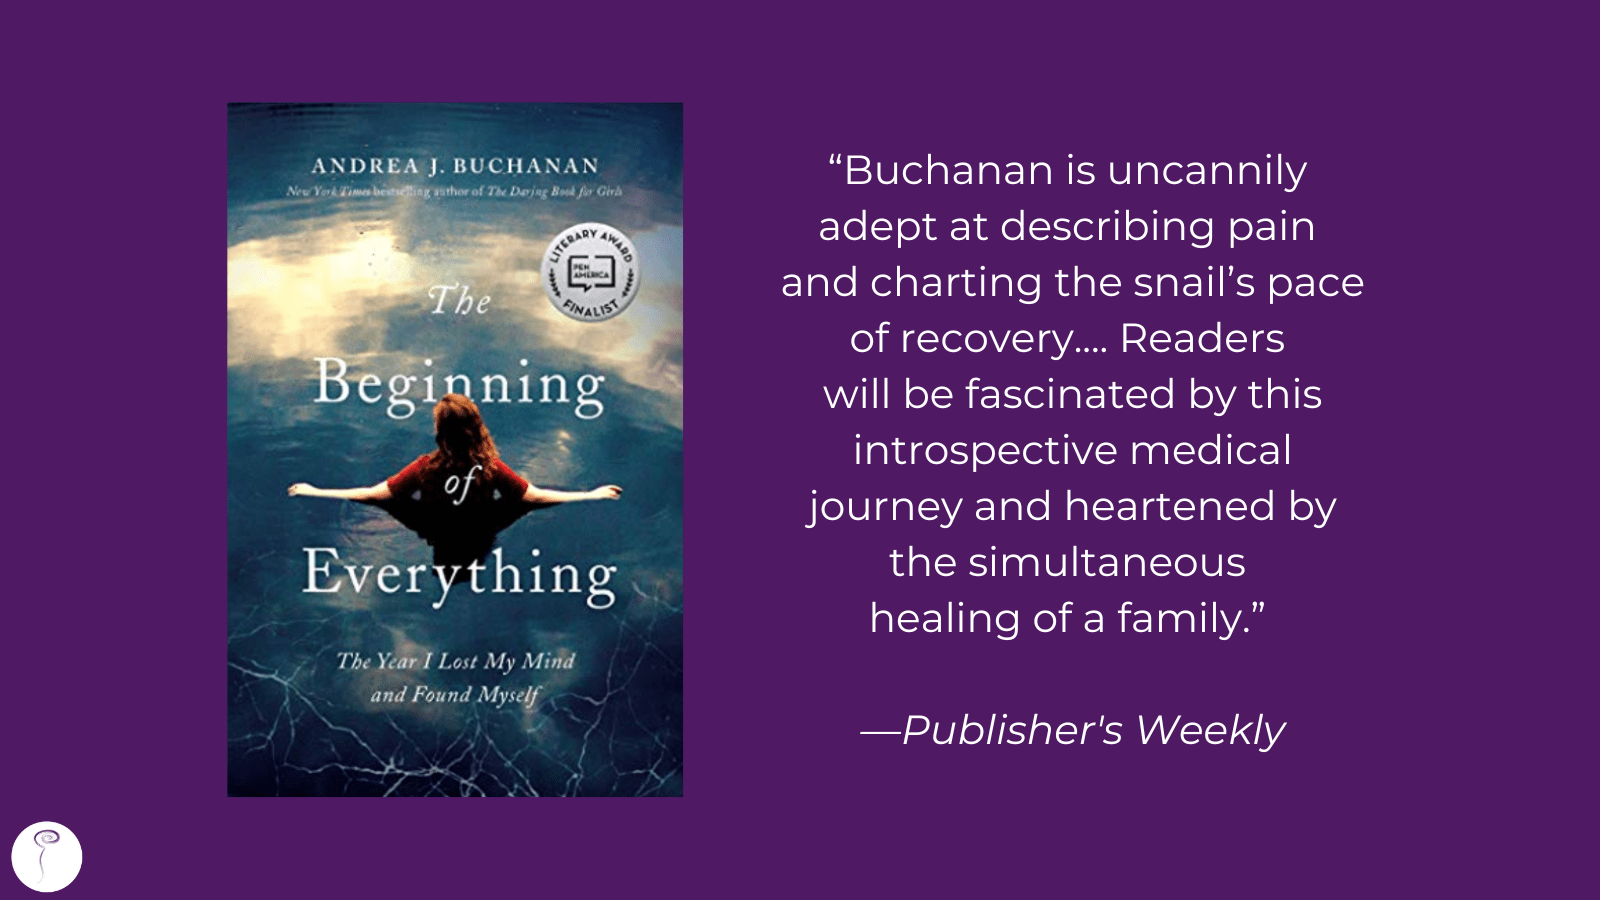 A graphic showing the cover to the book "The Beginning of Everything" and a quote from a reviewer